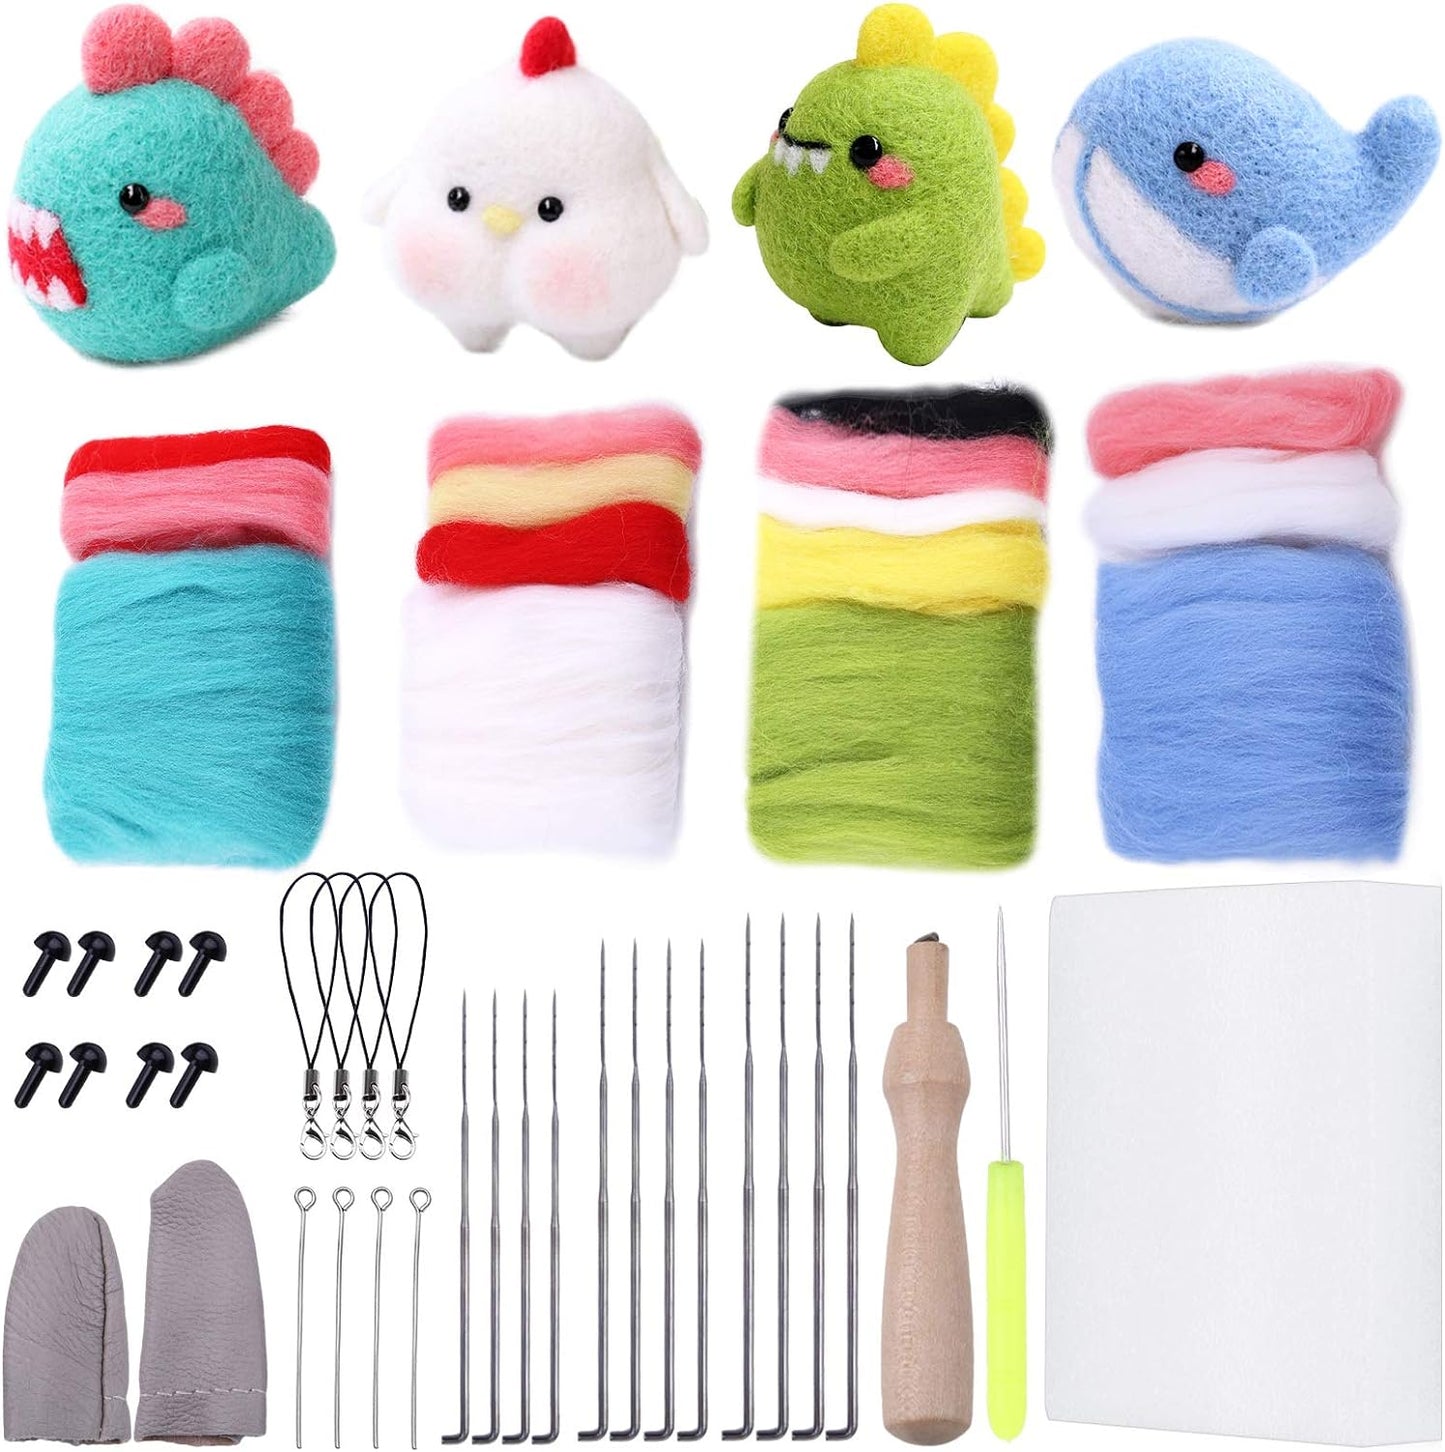 Needle Felting Starter Kit, Complete Needle Felting Tools, Needle Felting Kit with Felting Needles, Instructions, Felting Foam Mat, and Other Tools, for Adults Beginner Supplies DIY Crafts